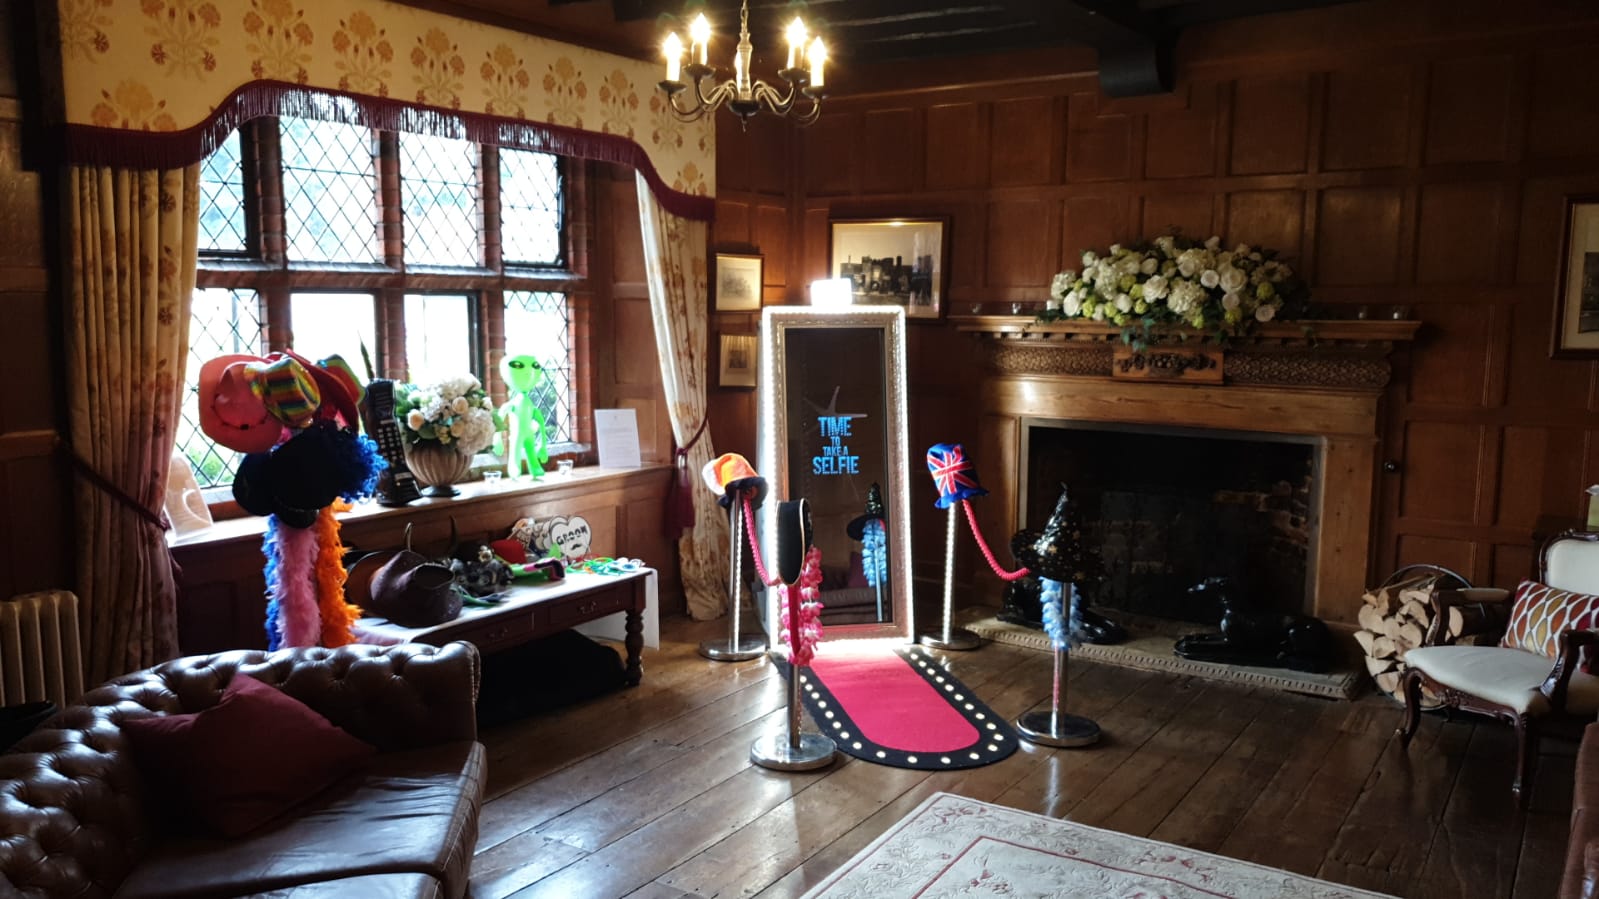 Try the Magic Selfie Mirror at the Manor of Groves Wedding Fayre Sunday 6th October